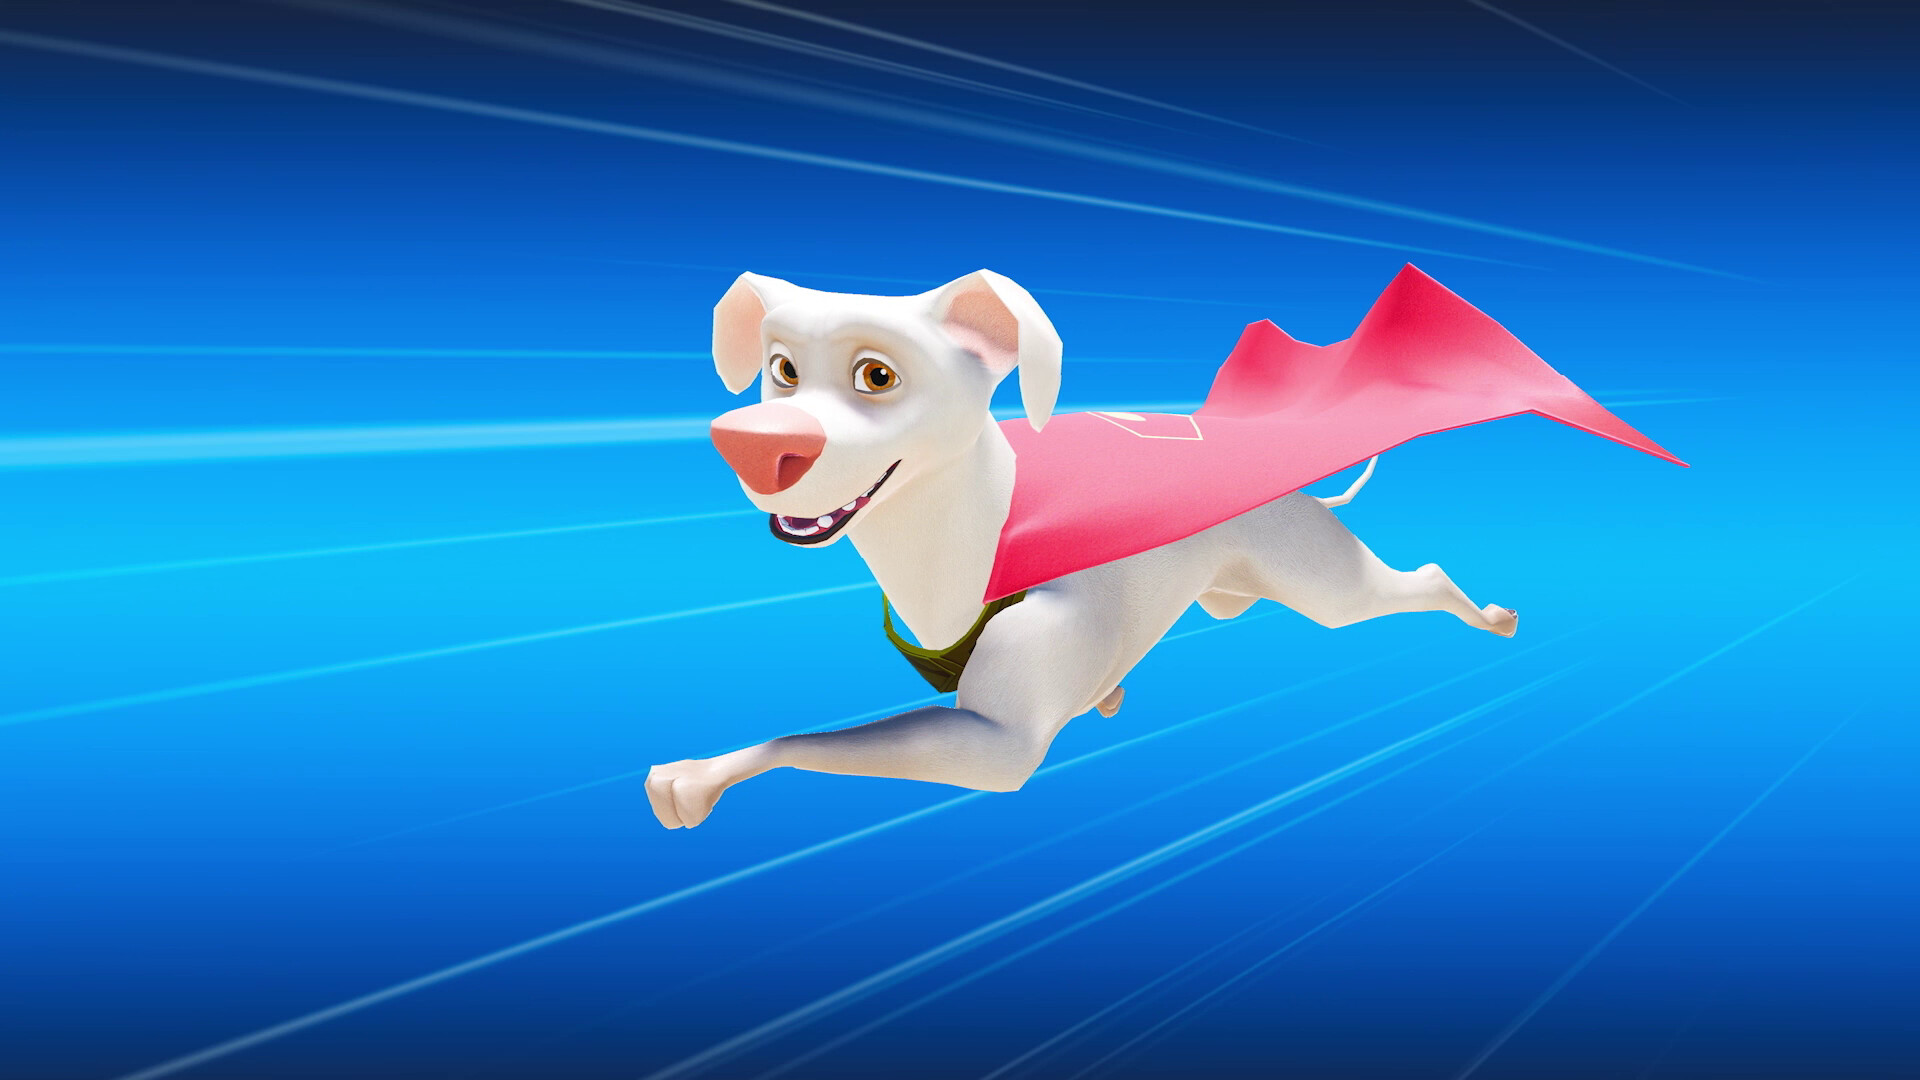 DC League of Super-Pets: The film stars Dwayne Johnson as the voice of Krypto. 1920x1080 Full HD Wallpaper.